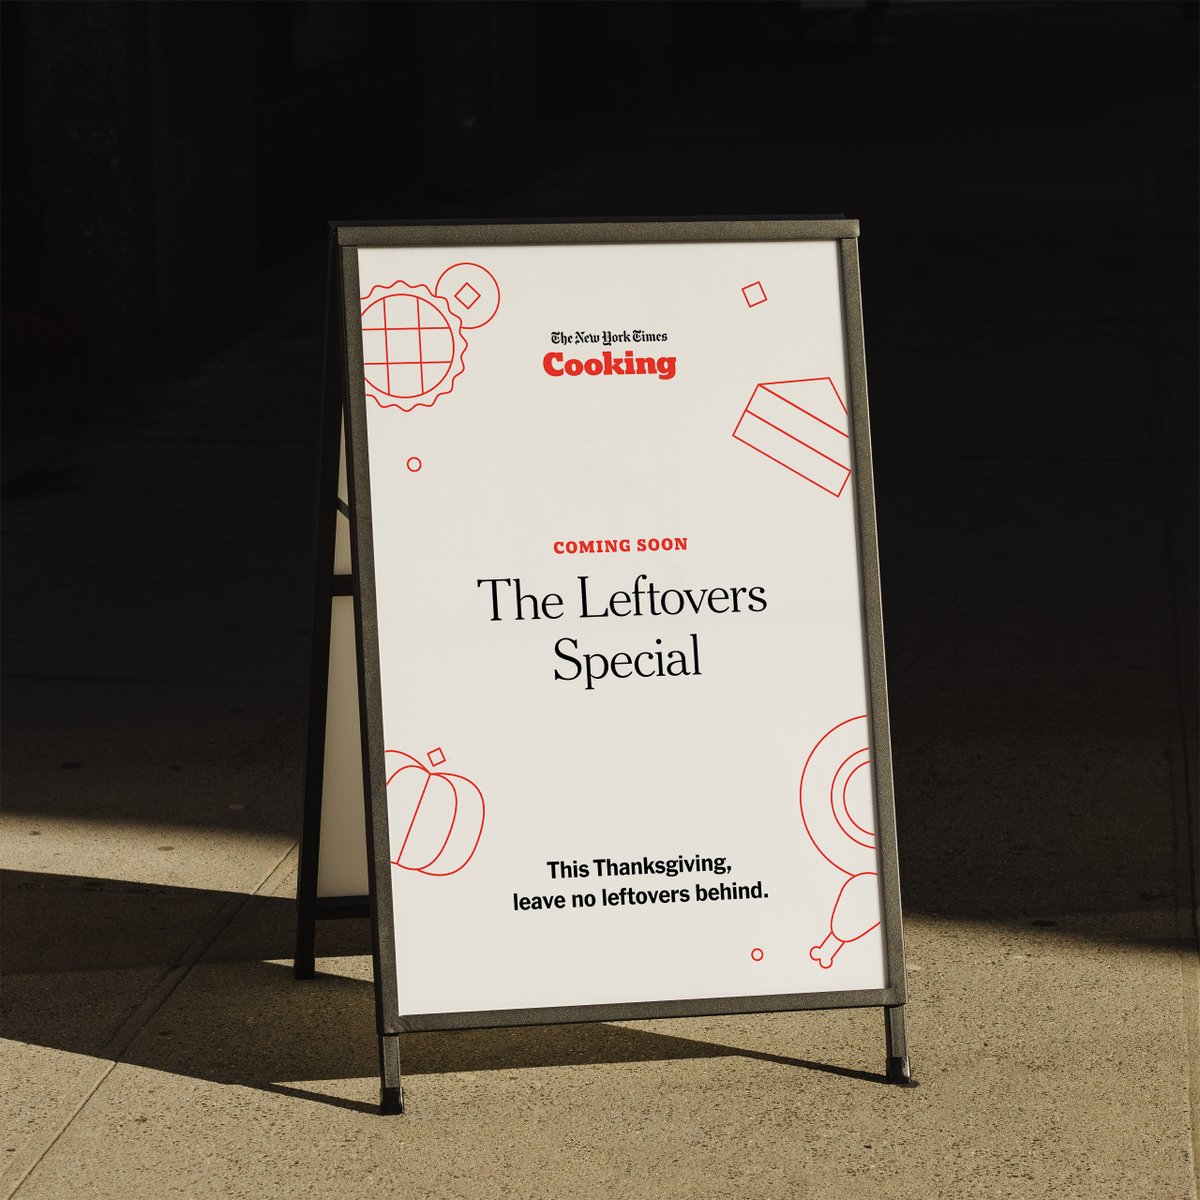 Free turkey BBQ leftovers sandwich, anyone? Come prep for Thanksgiving early with Franklin BBQ and @nytcooking on Monday! @clarkbar will answer your Thanksgiving questions, and everyone will take home recipes, tips and lunch. Book a ticket: nytimes.com/theleftoverssp…